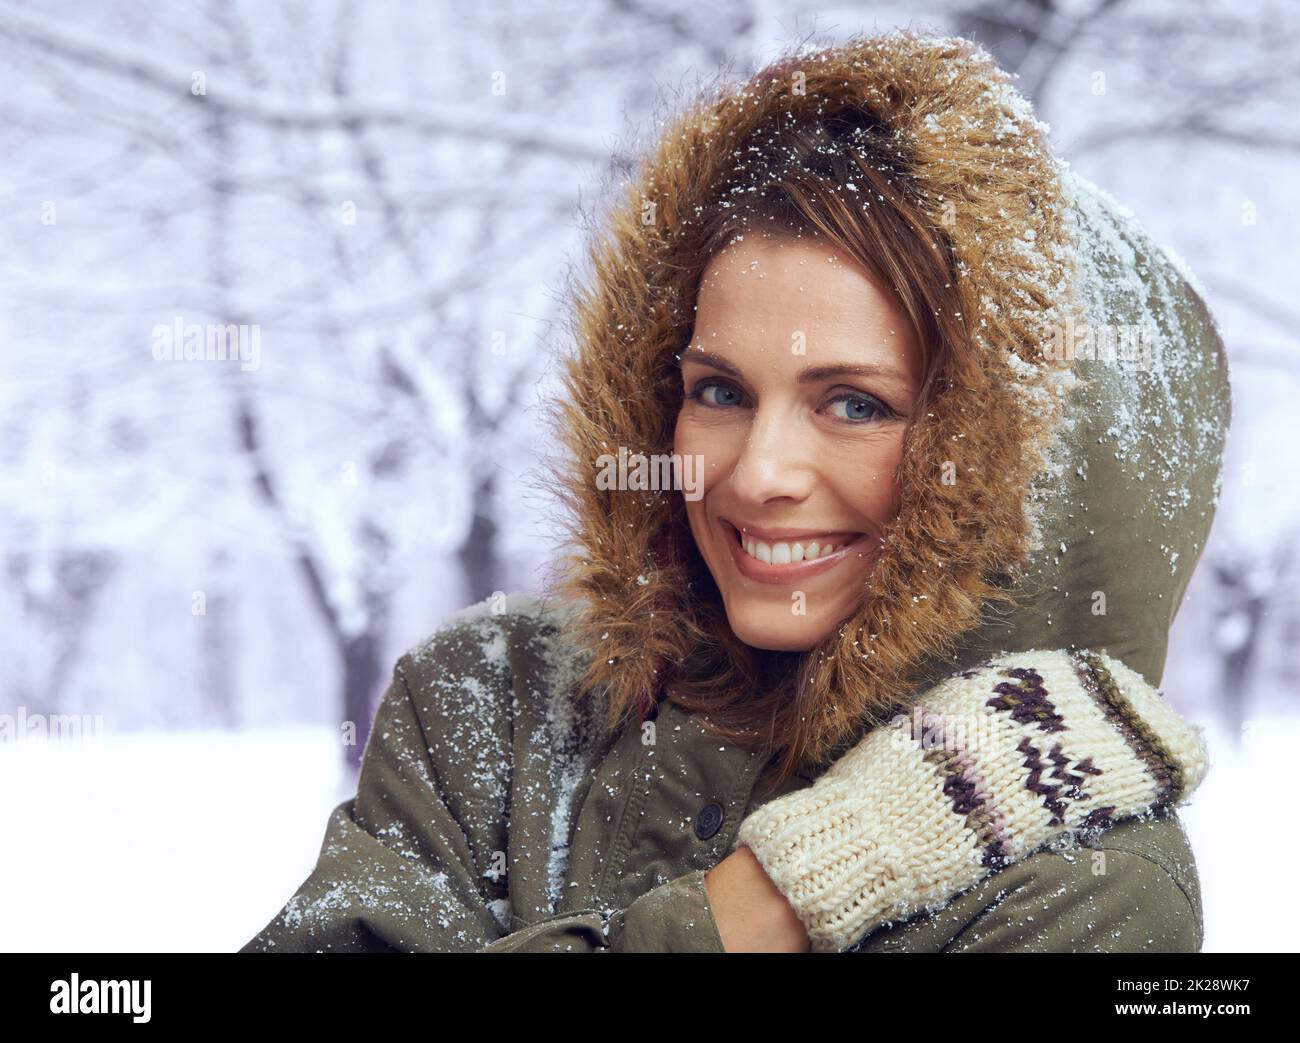 Loving the first snowfall. an attractive woman enjoying herself outside in the snow. Stock Photo